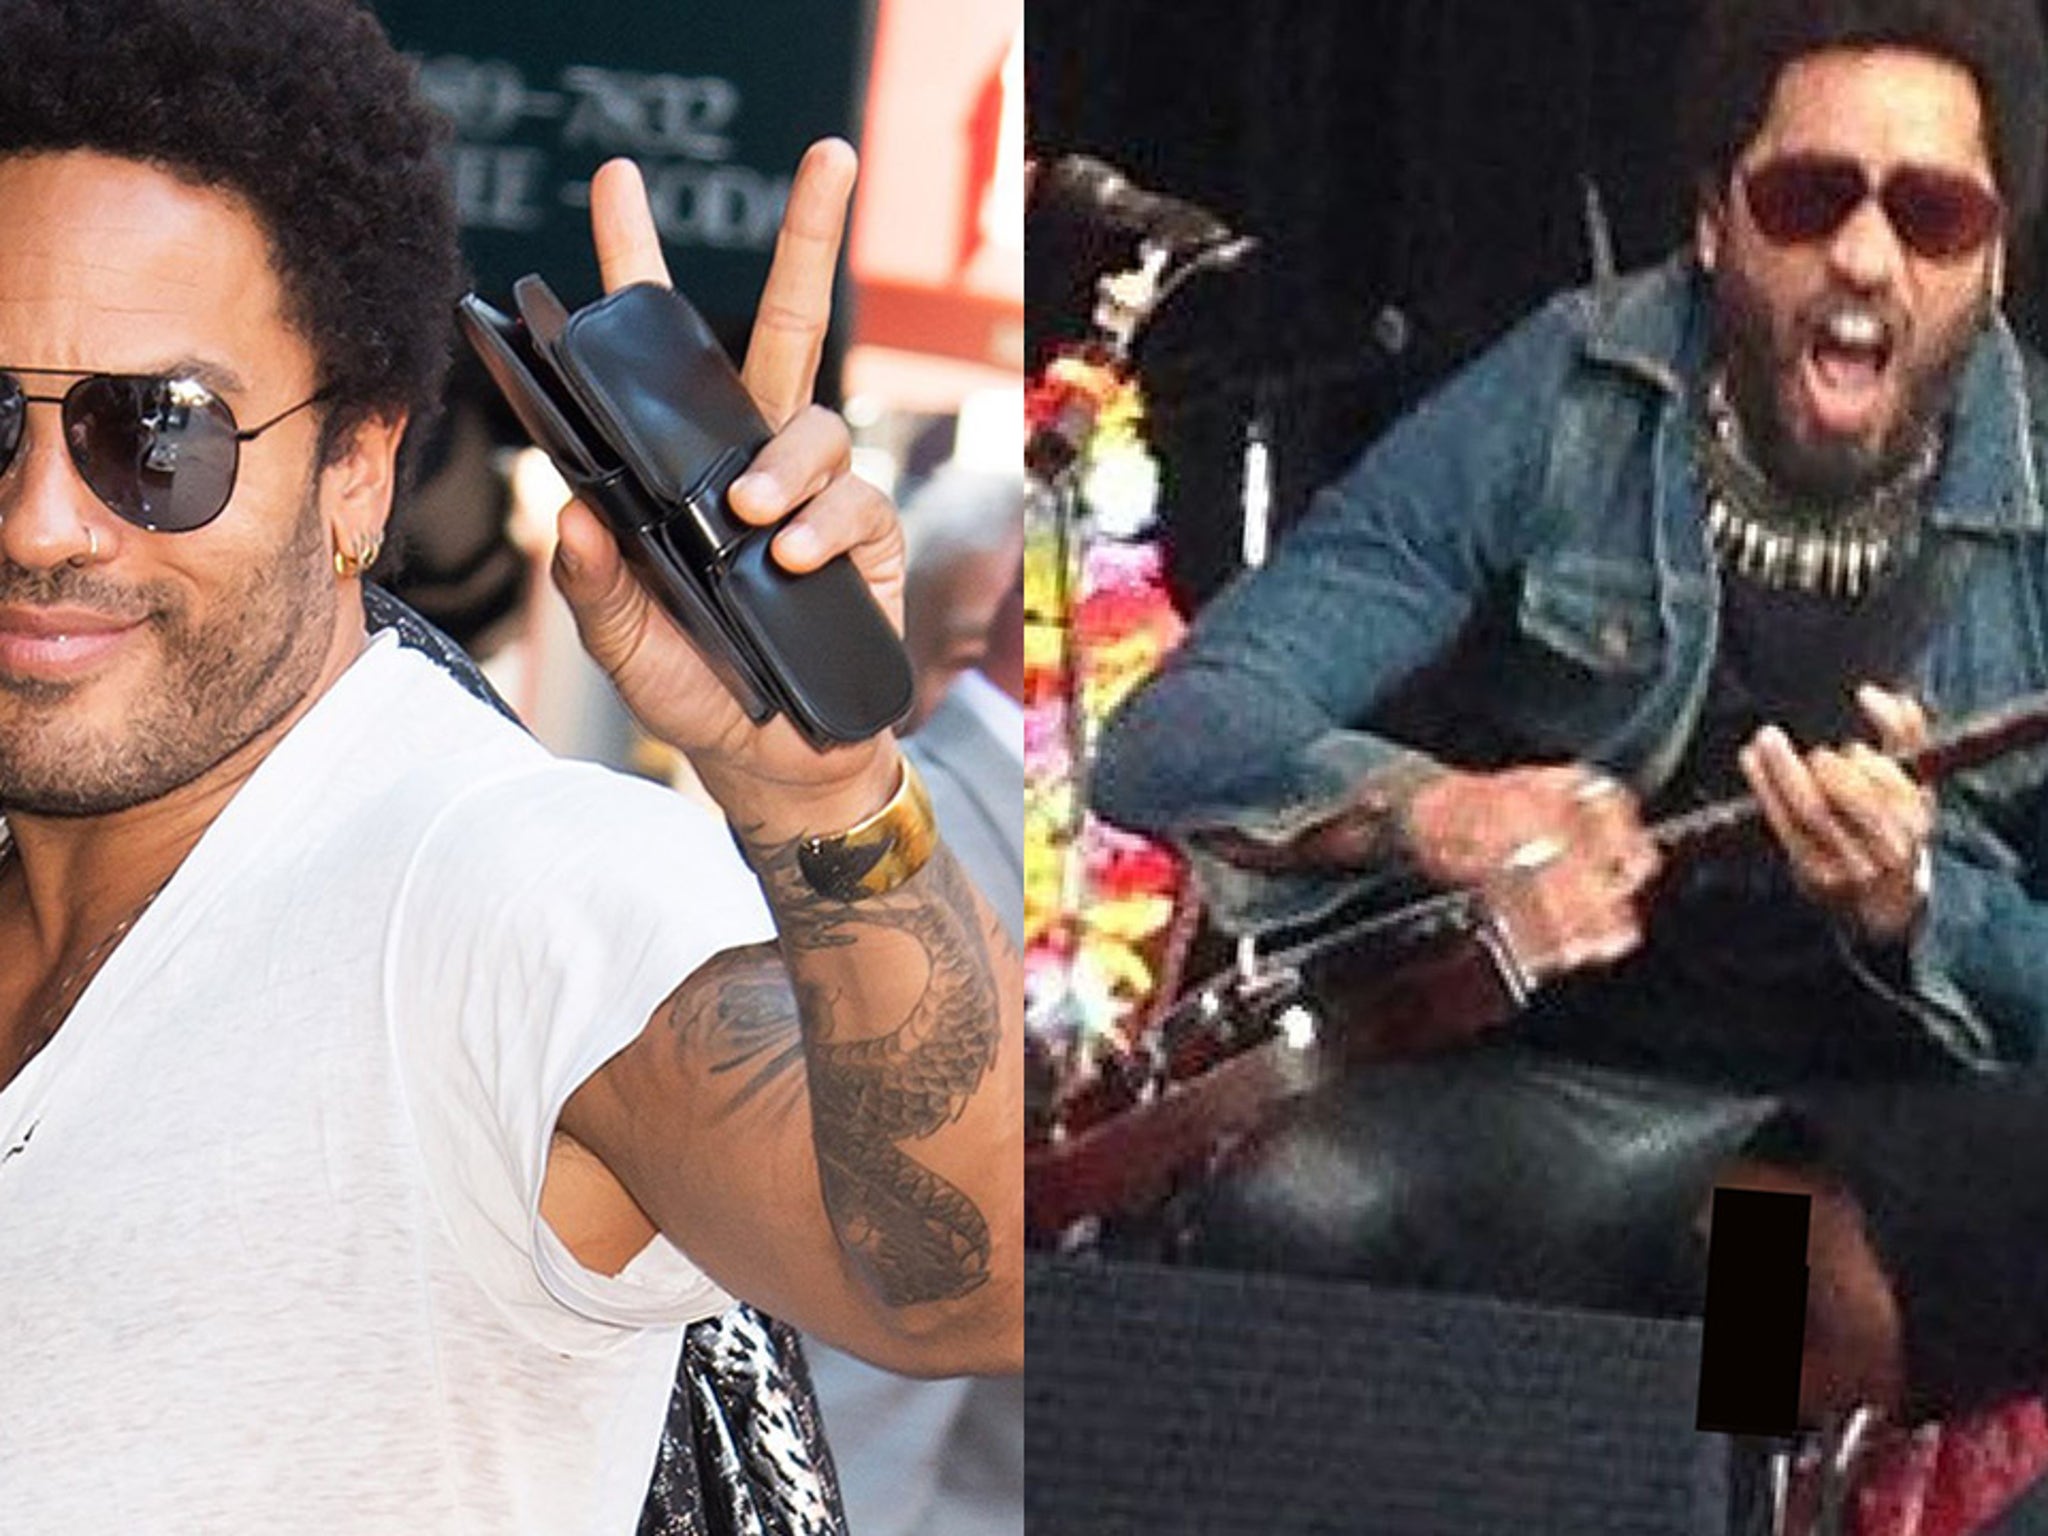 cutter Coalescence The alps Lenny Kravitz Exposes Junk After Leather Pants Rip Open!!! (PHOTO)